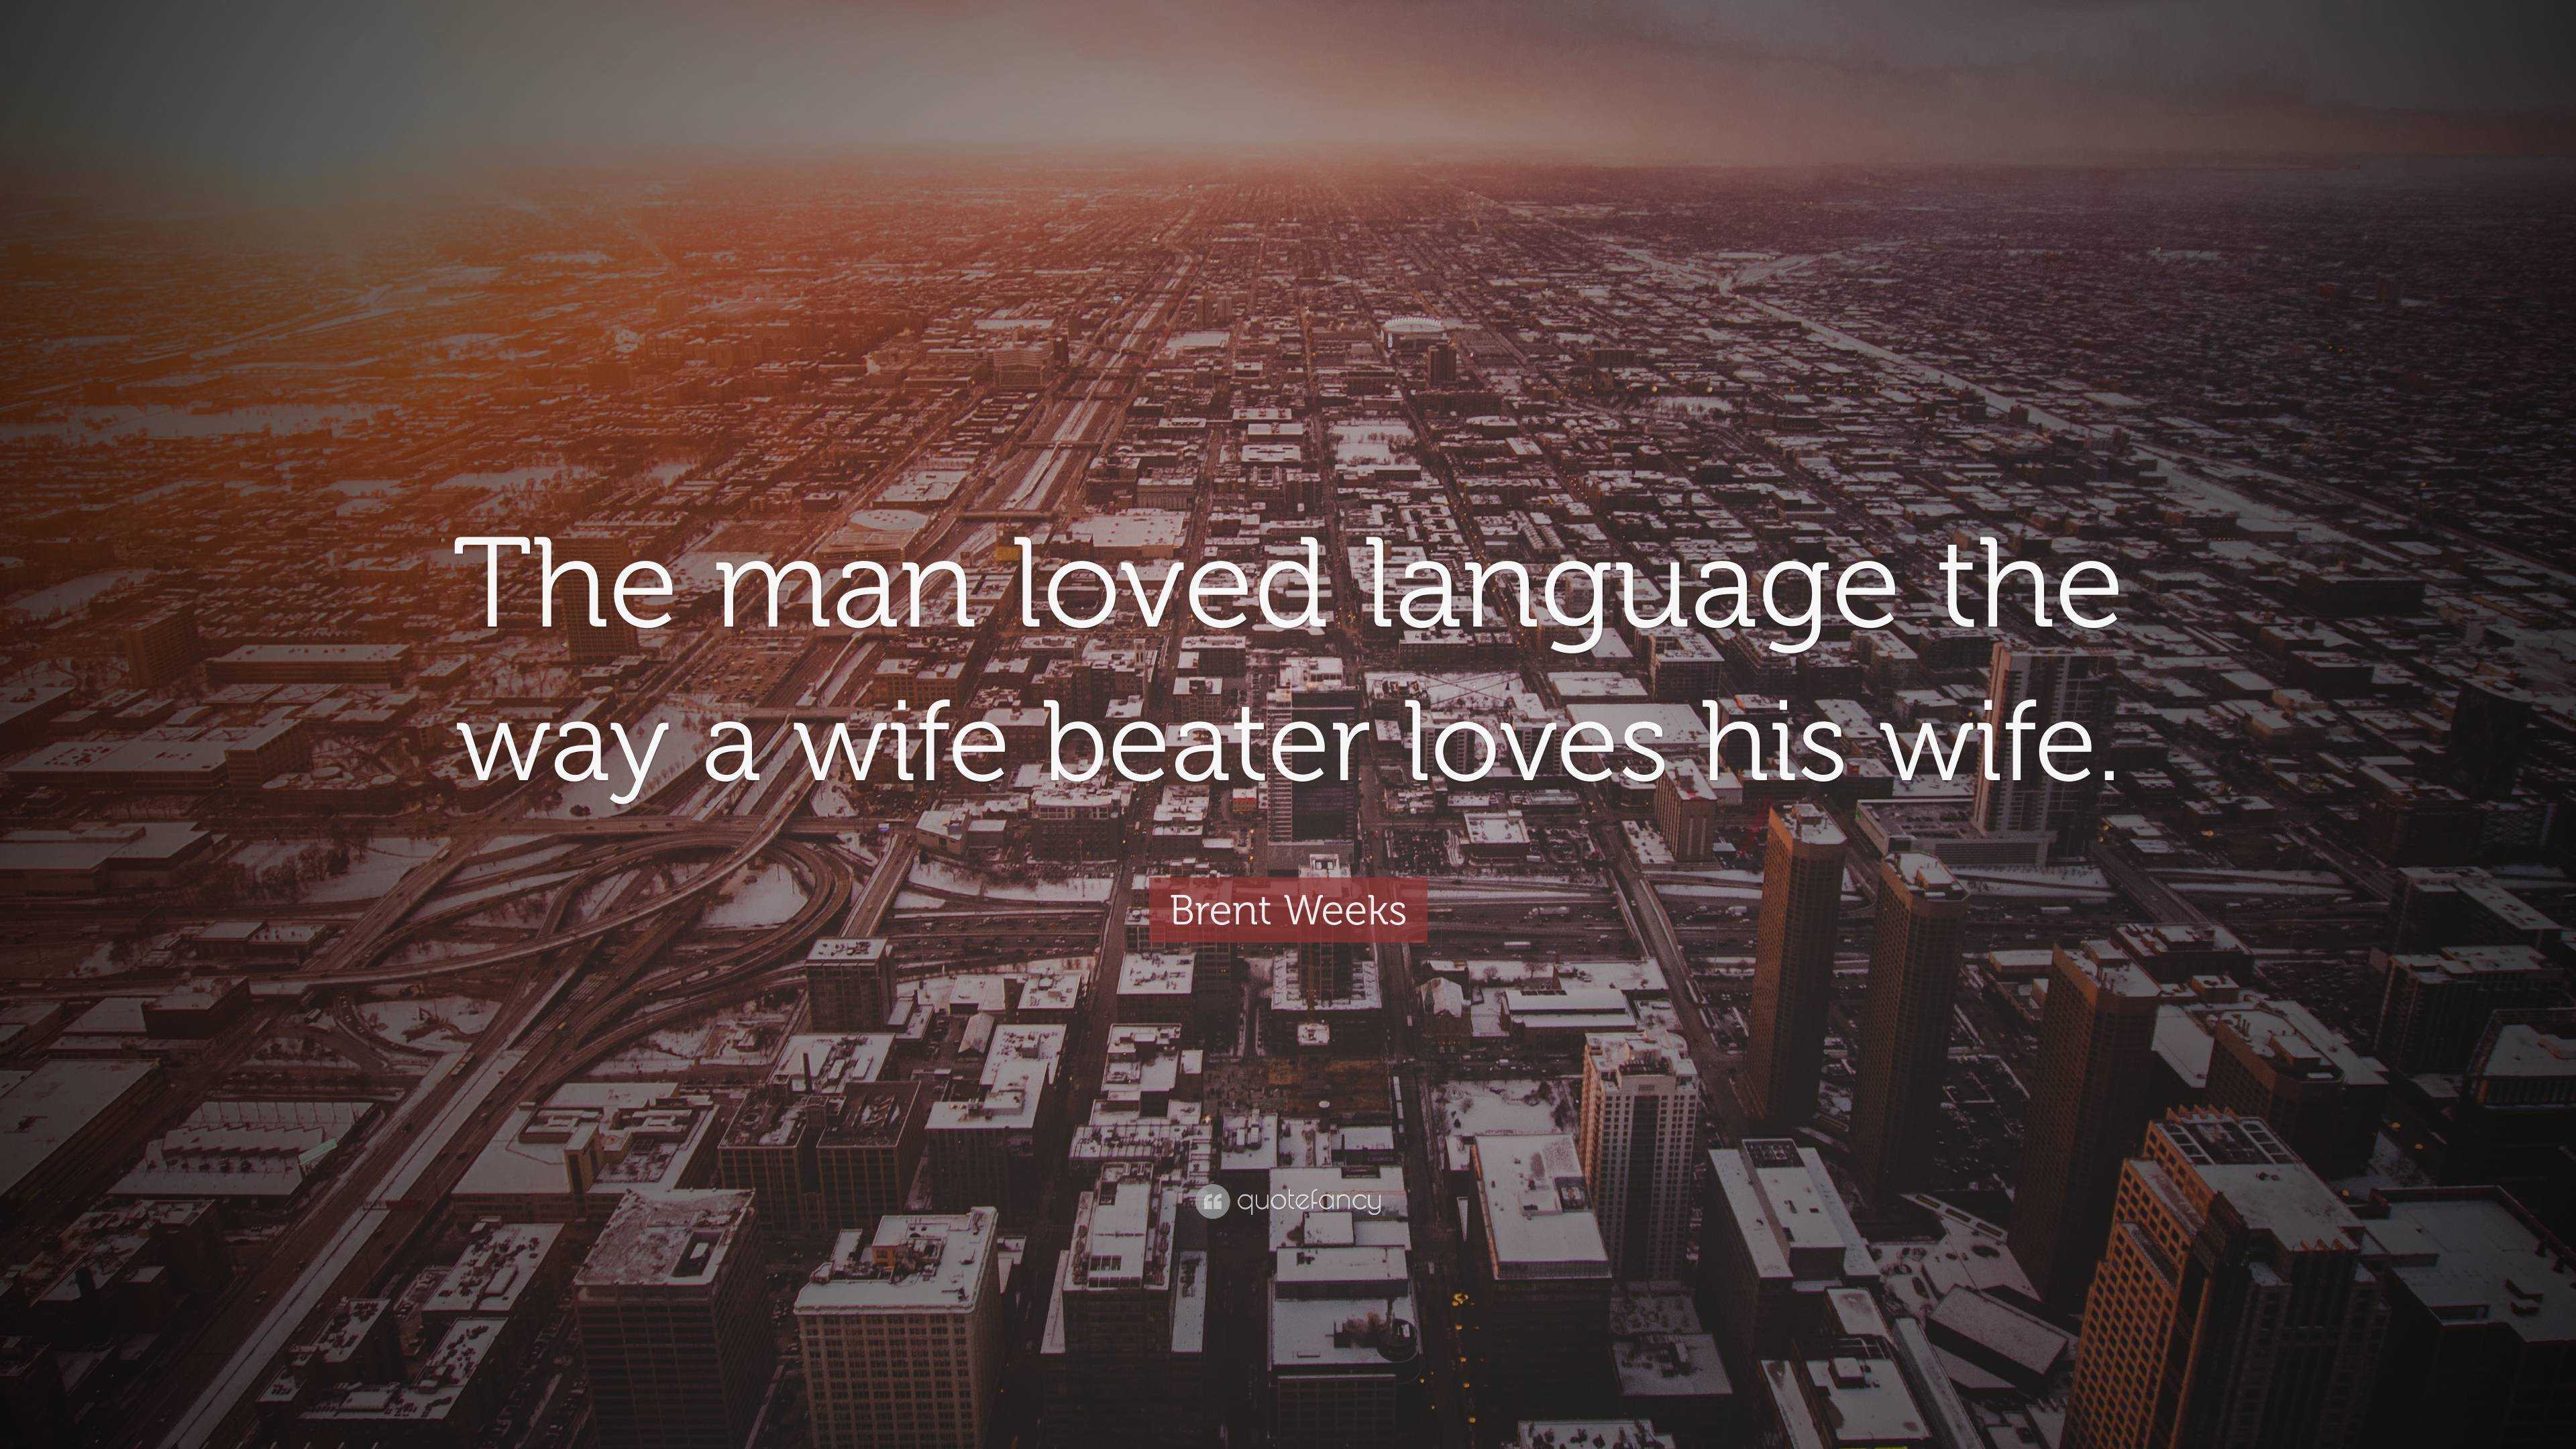 gradvist Manøvre marts Brent Weeks Quote: “The man loved language the way a wife beater loves his  wife.”